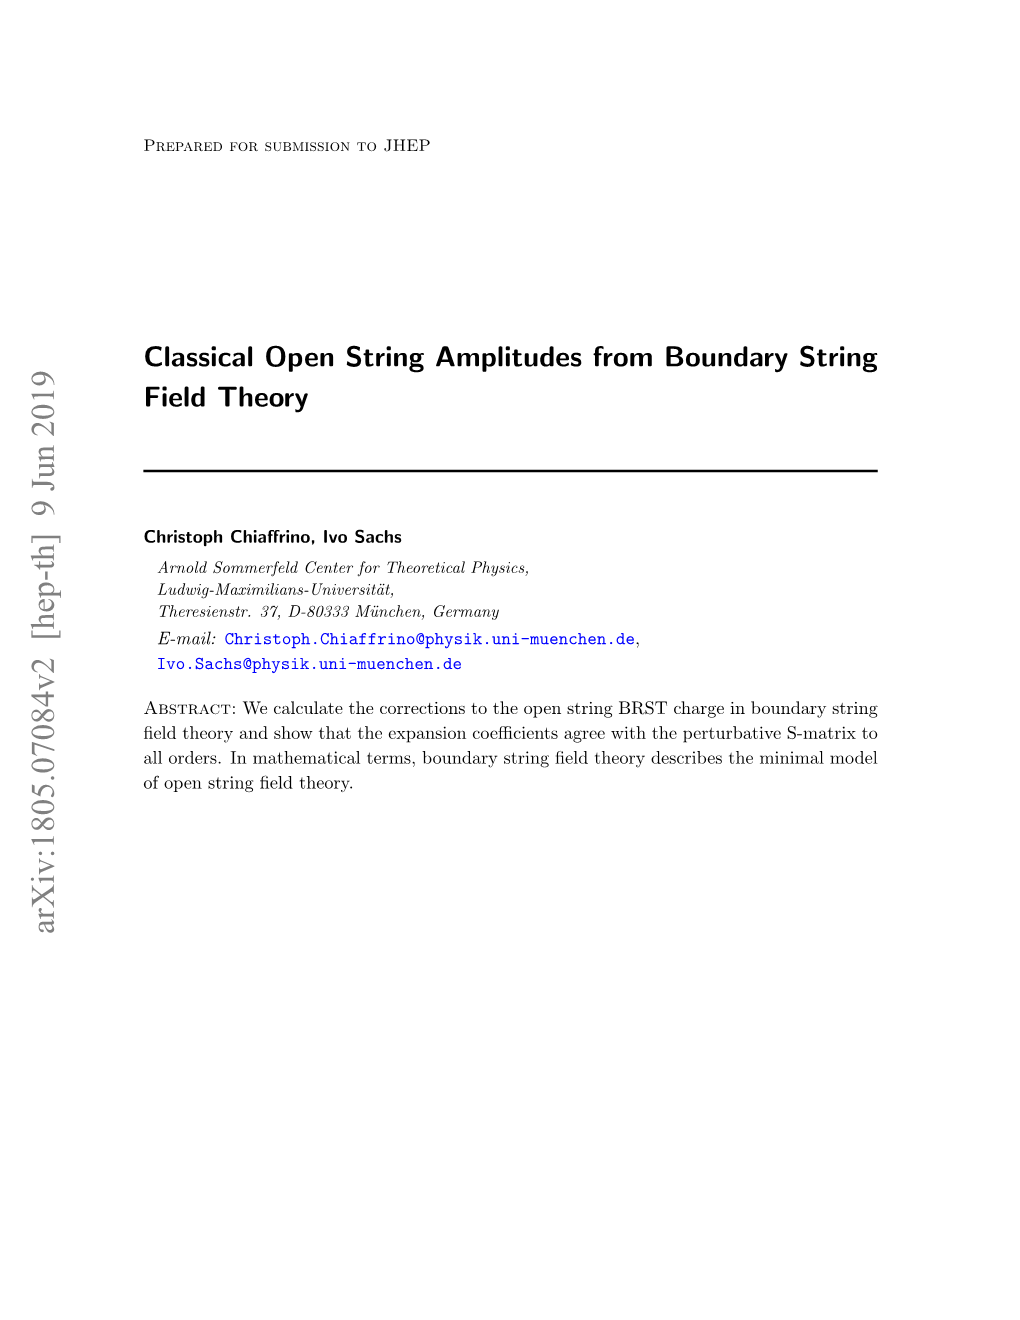 Classical Open String Amplitudes from Boundary String Field Theory